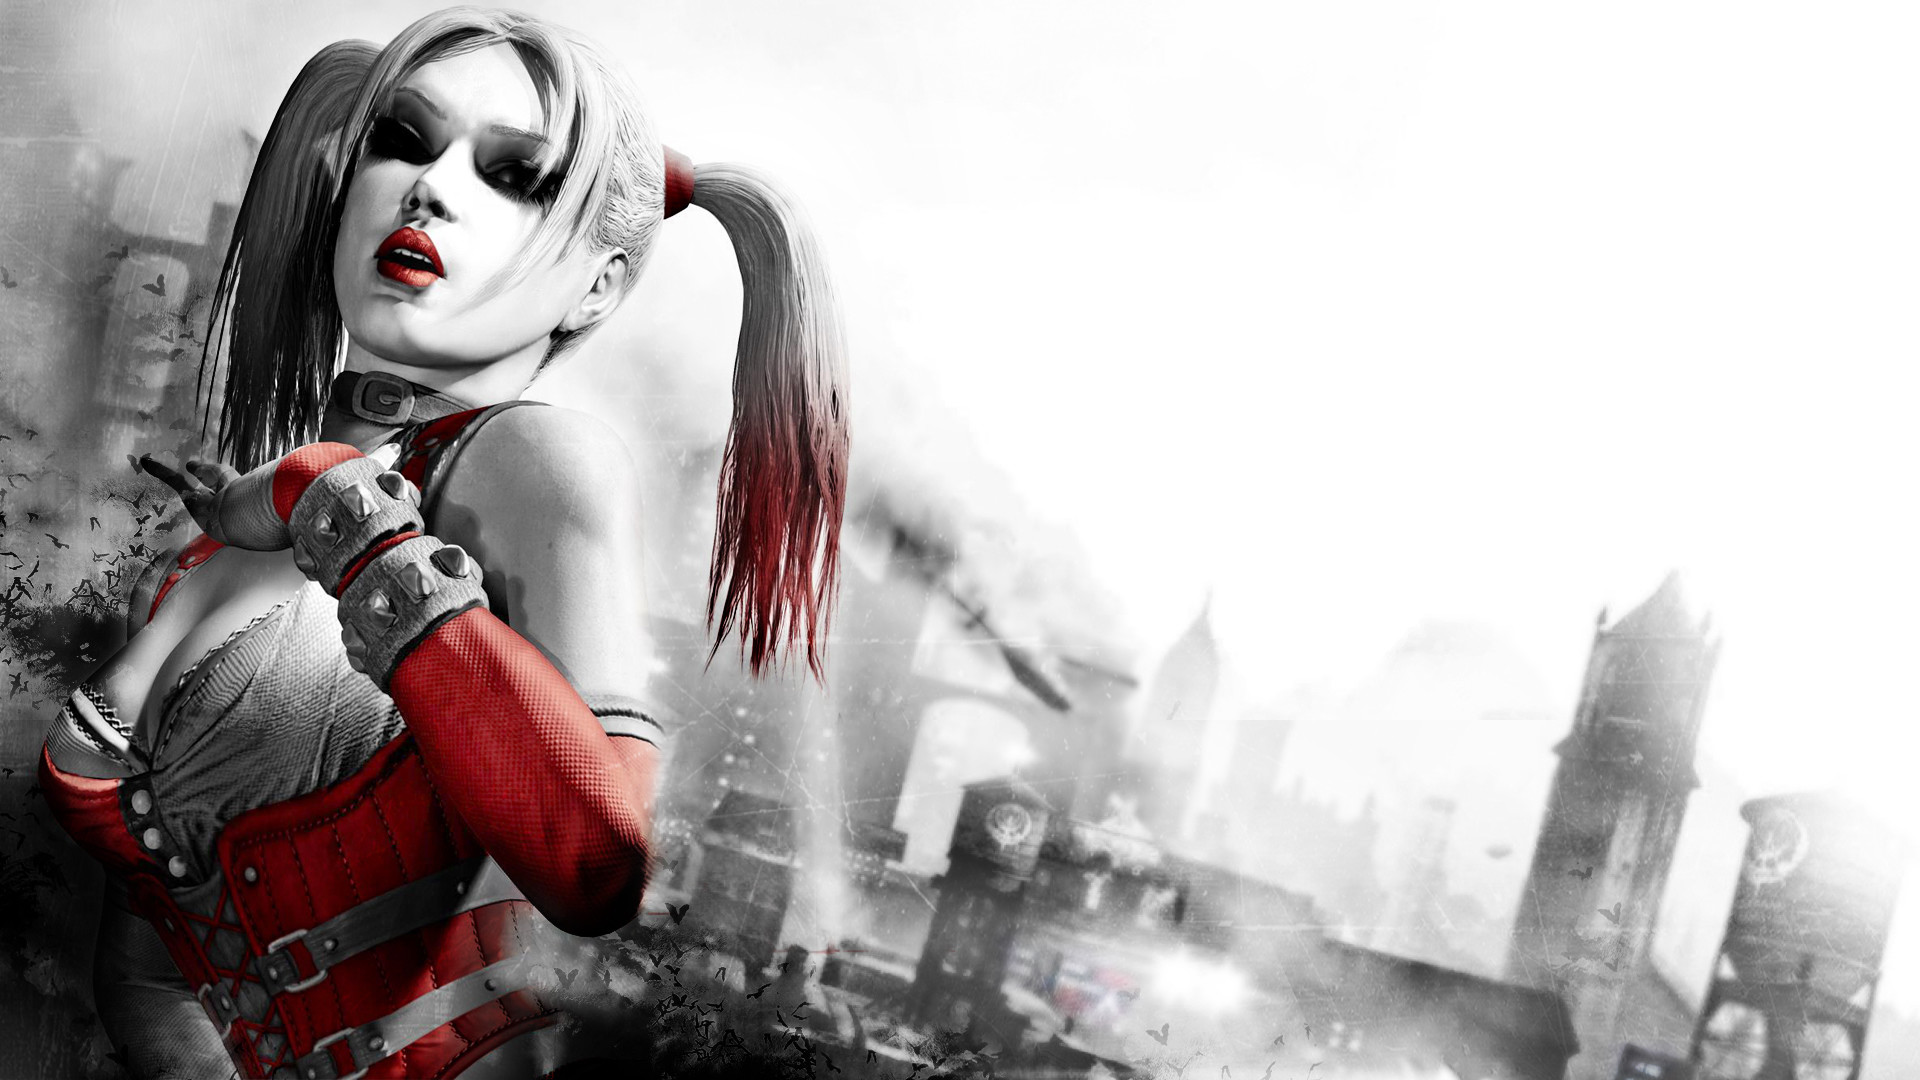 1920x1080 366 Harley Quinn HD Wallpapers | Backgrounds - Wallpaper Abyss - Page 4